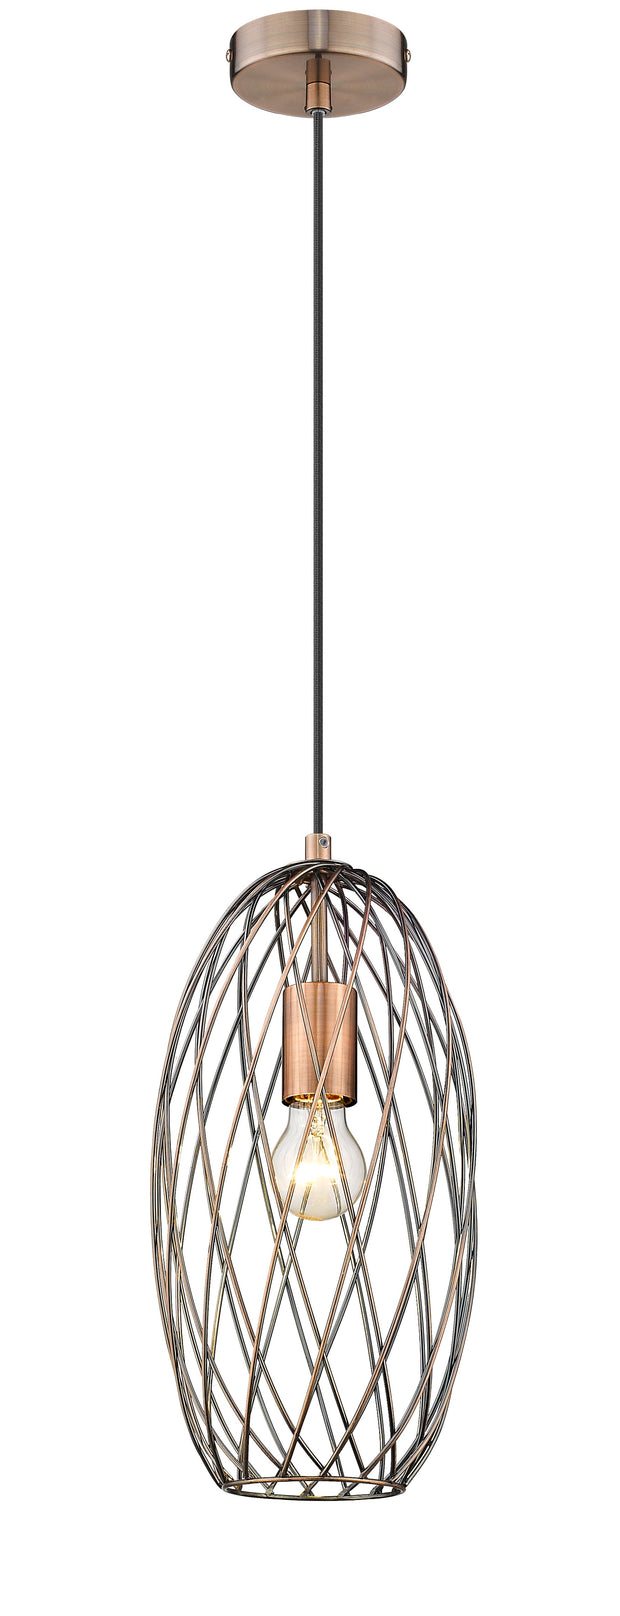 Stylish Lighting Telford Cylindrical Antique Copper Cage Pendant